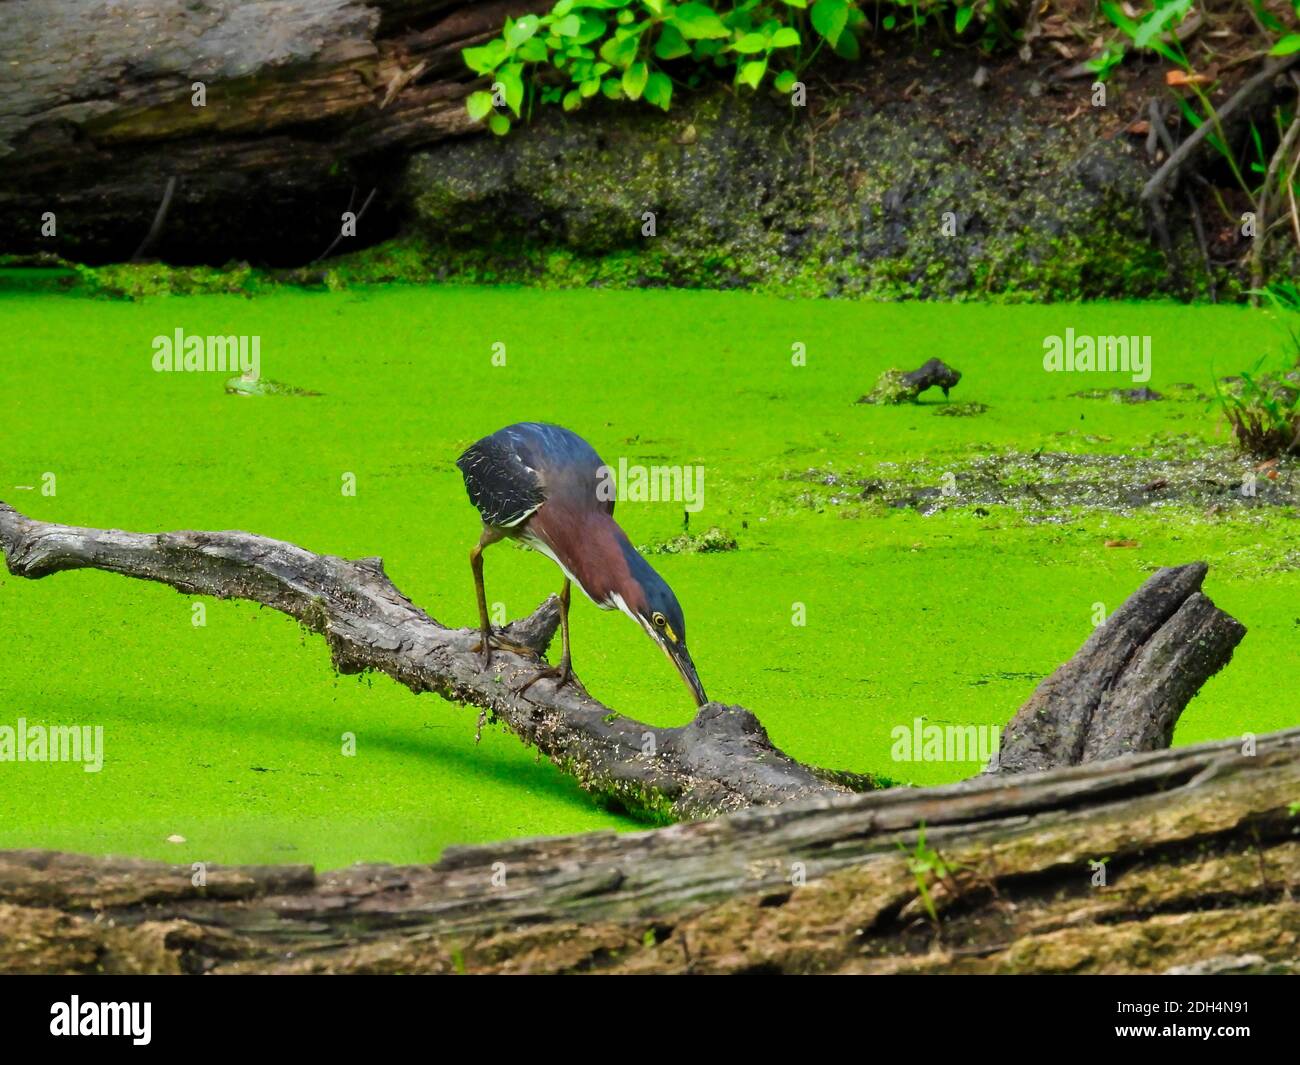 Heron on a tree branch: Green heron bird stops and puts its beak in the pond that is covered by a full duckweed bloom while perched on a fallen tree Stock Photo